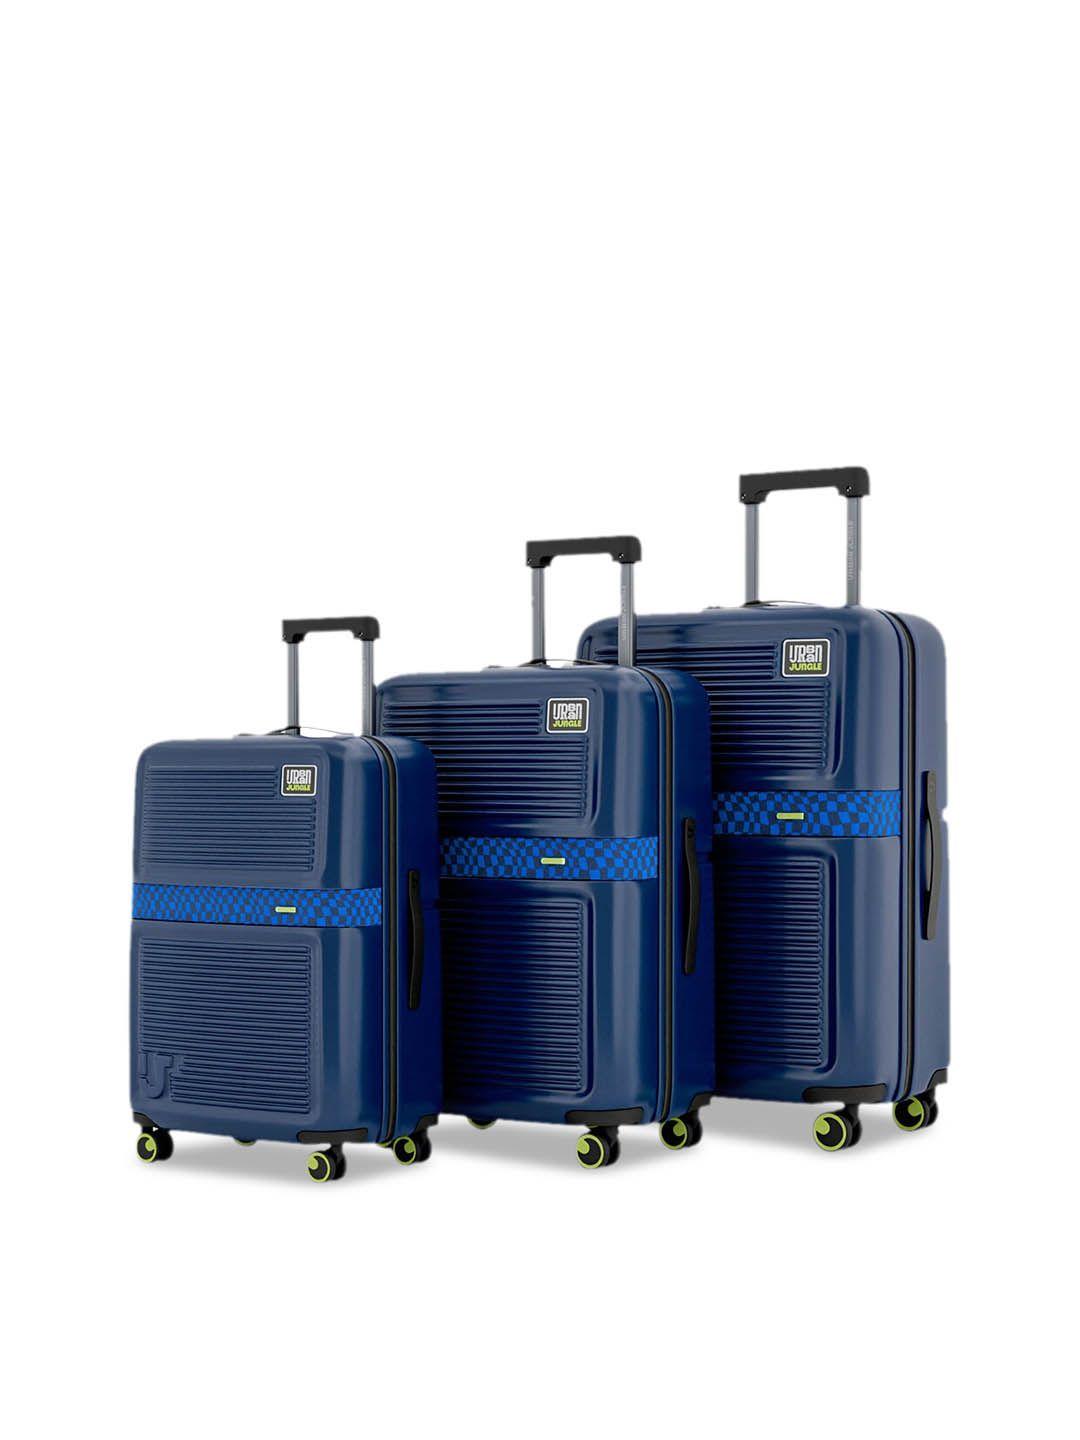 urban-jungle-set-of-3-textured-hard-sided-trolley-suitcase